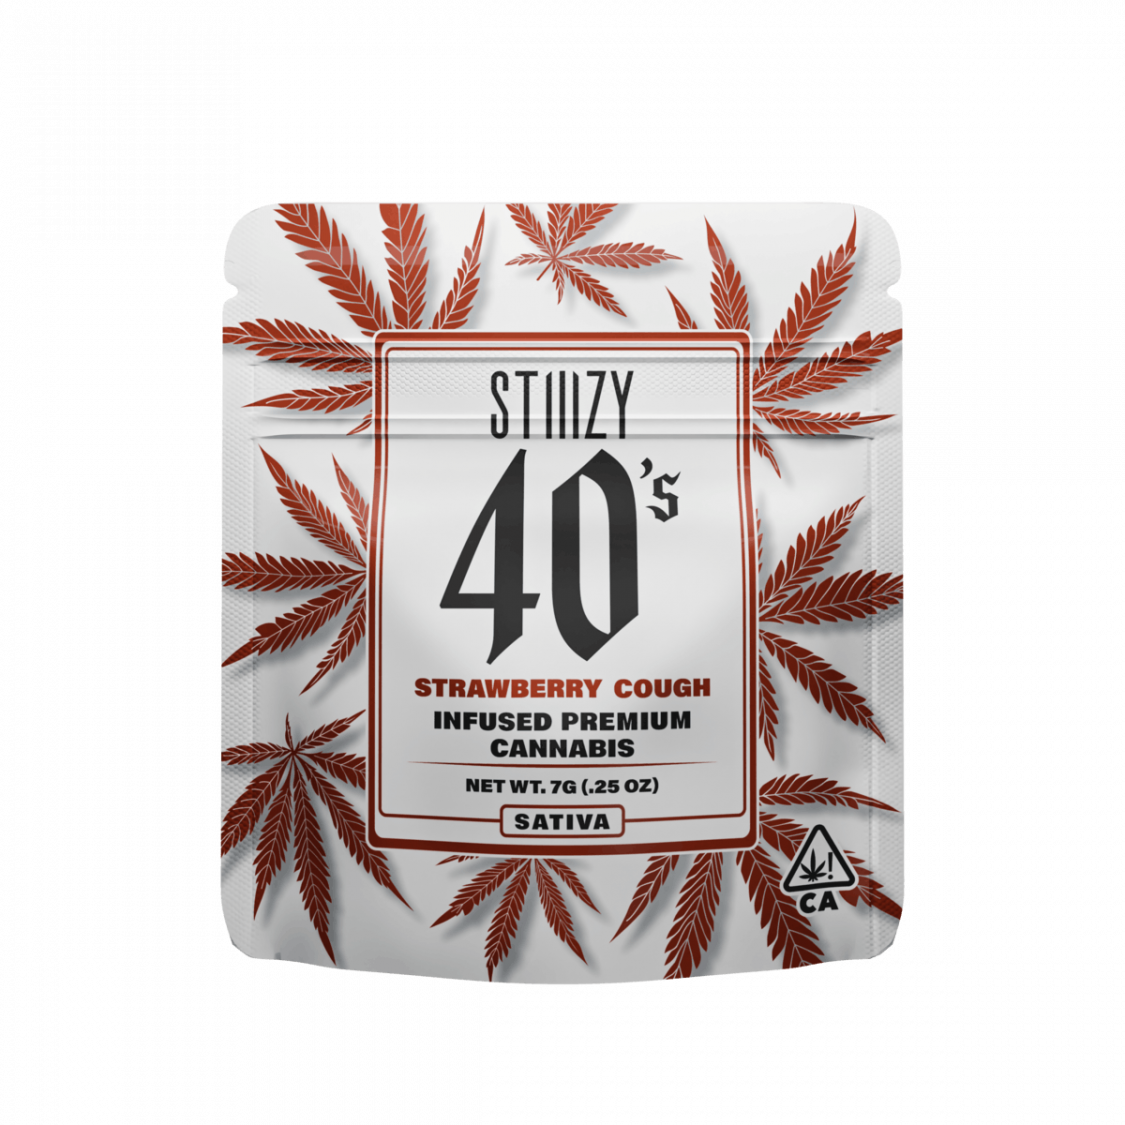 STIIIZY Strawberry Cough 40s Infused Flower Flower Infused Flower